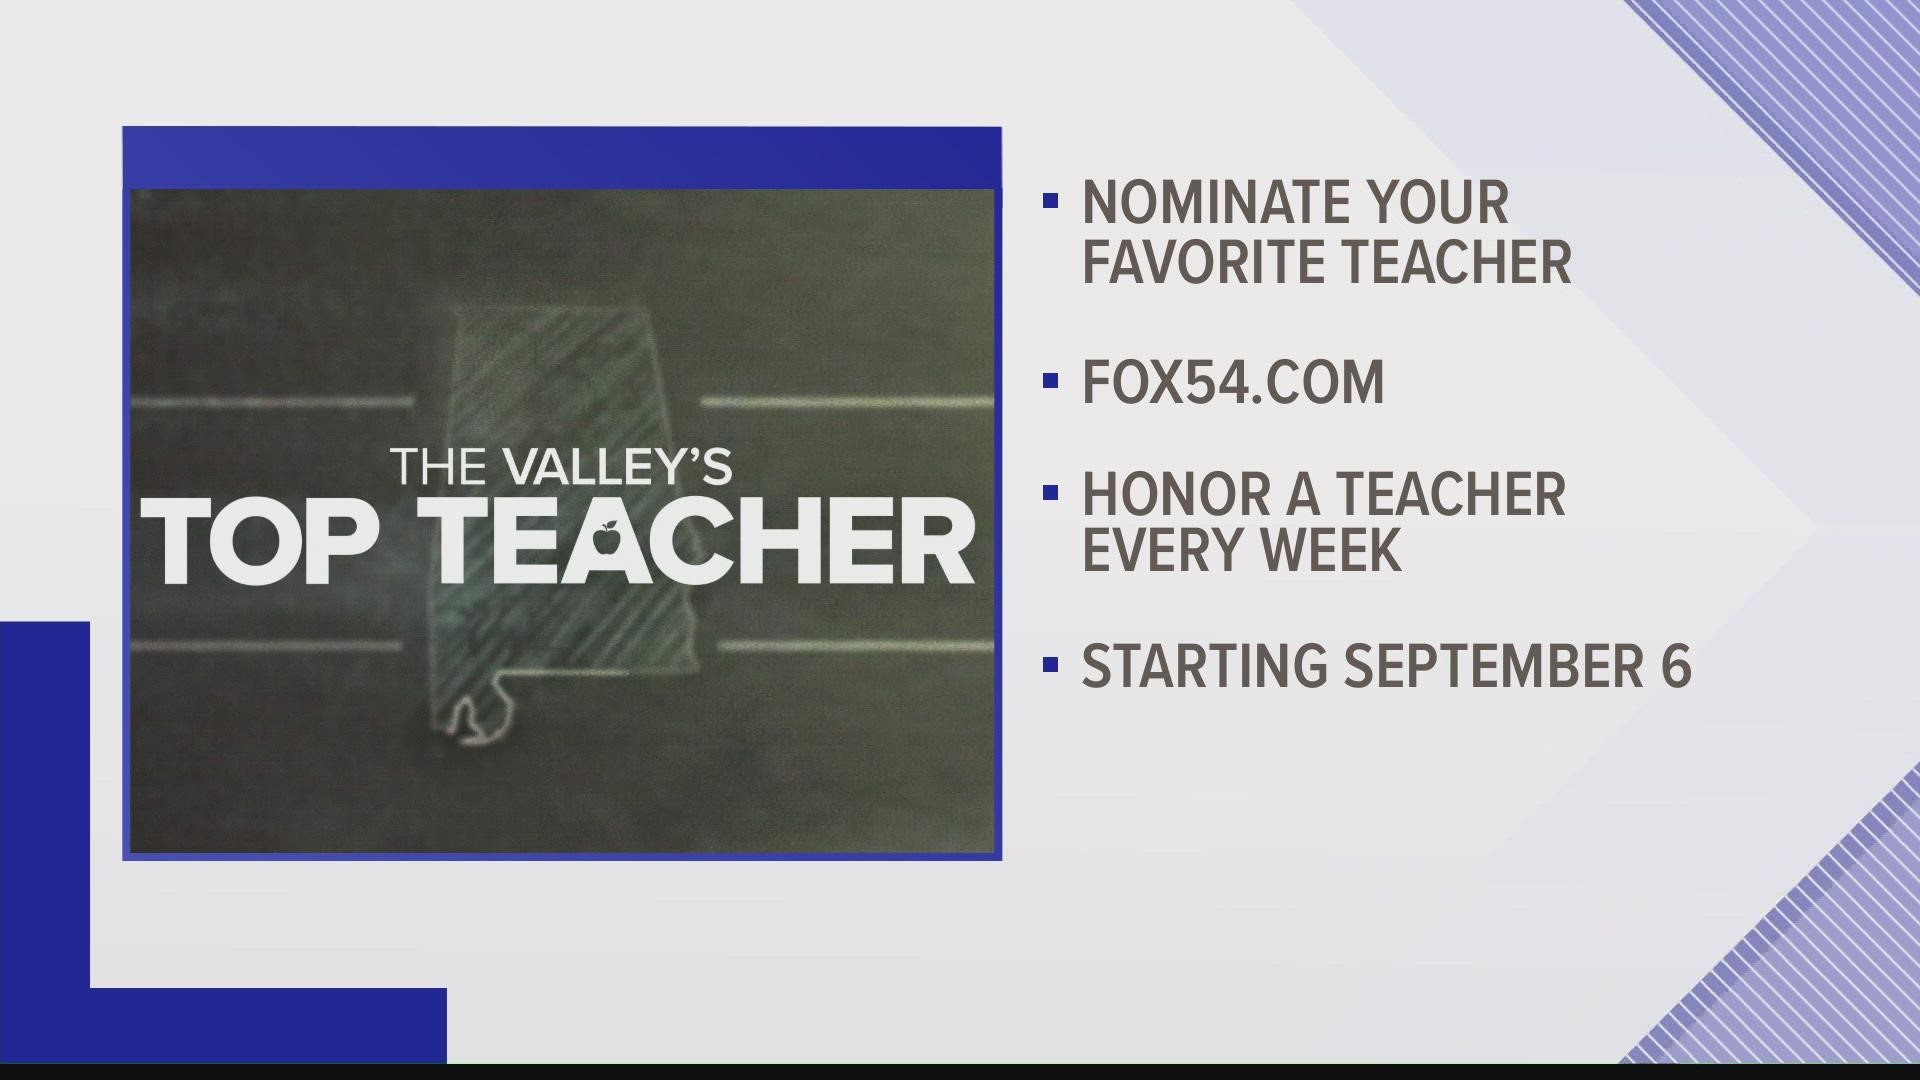 Kids are back to the books, and now is the time to nominate the great teacher in your child's life.